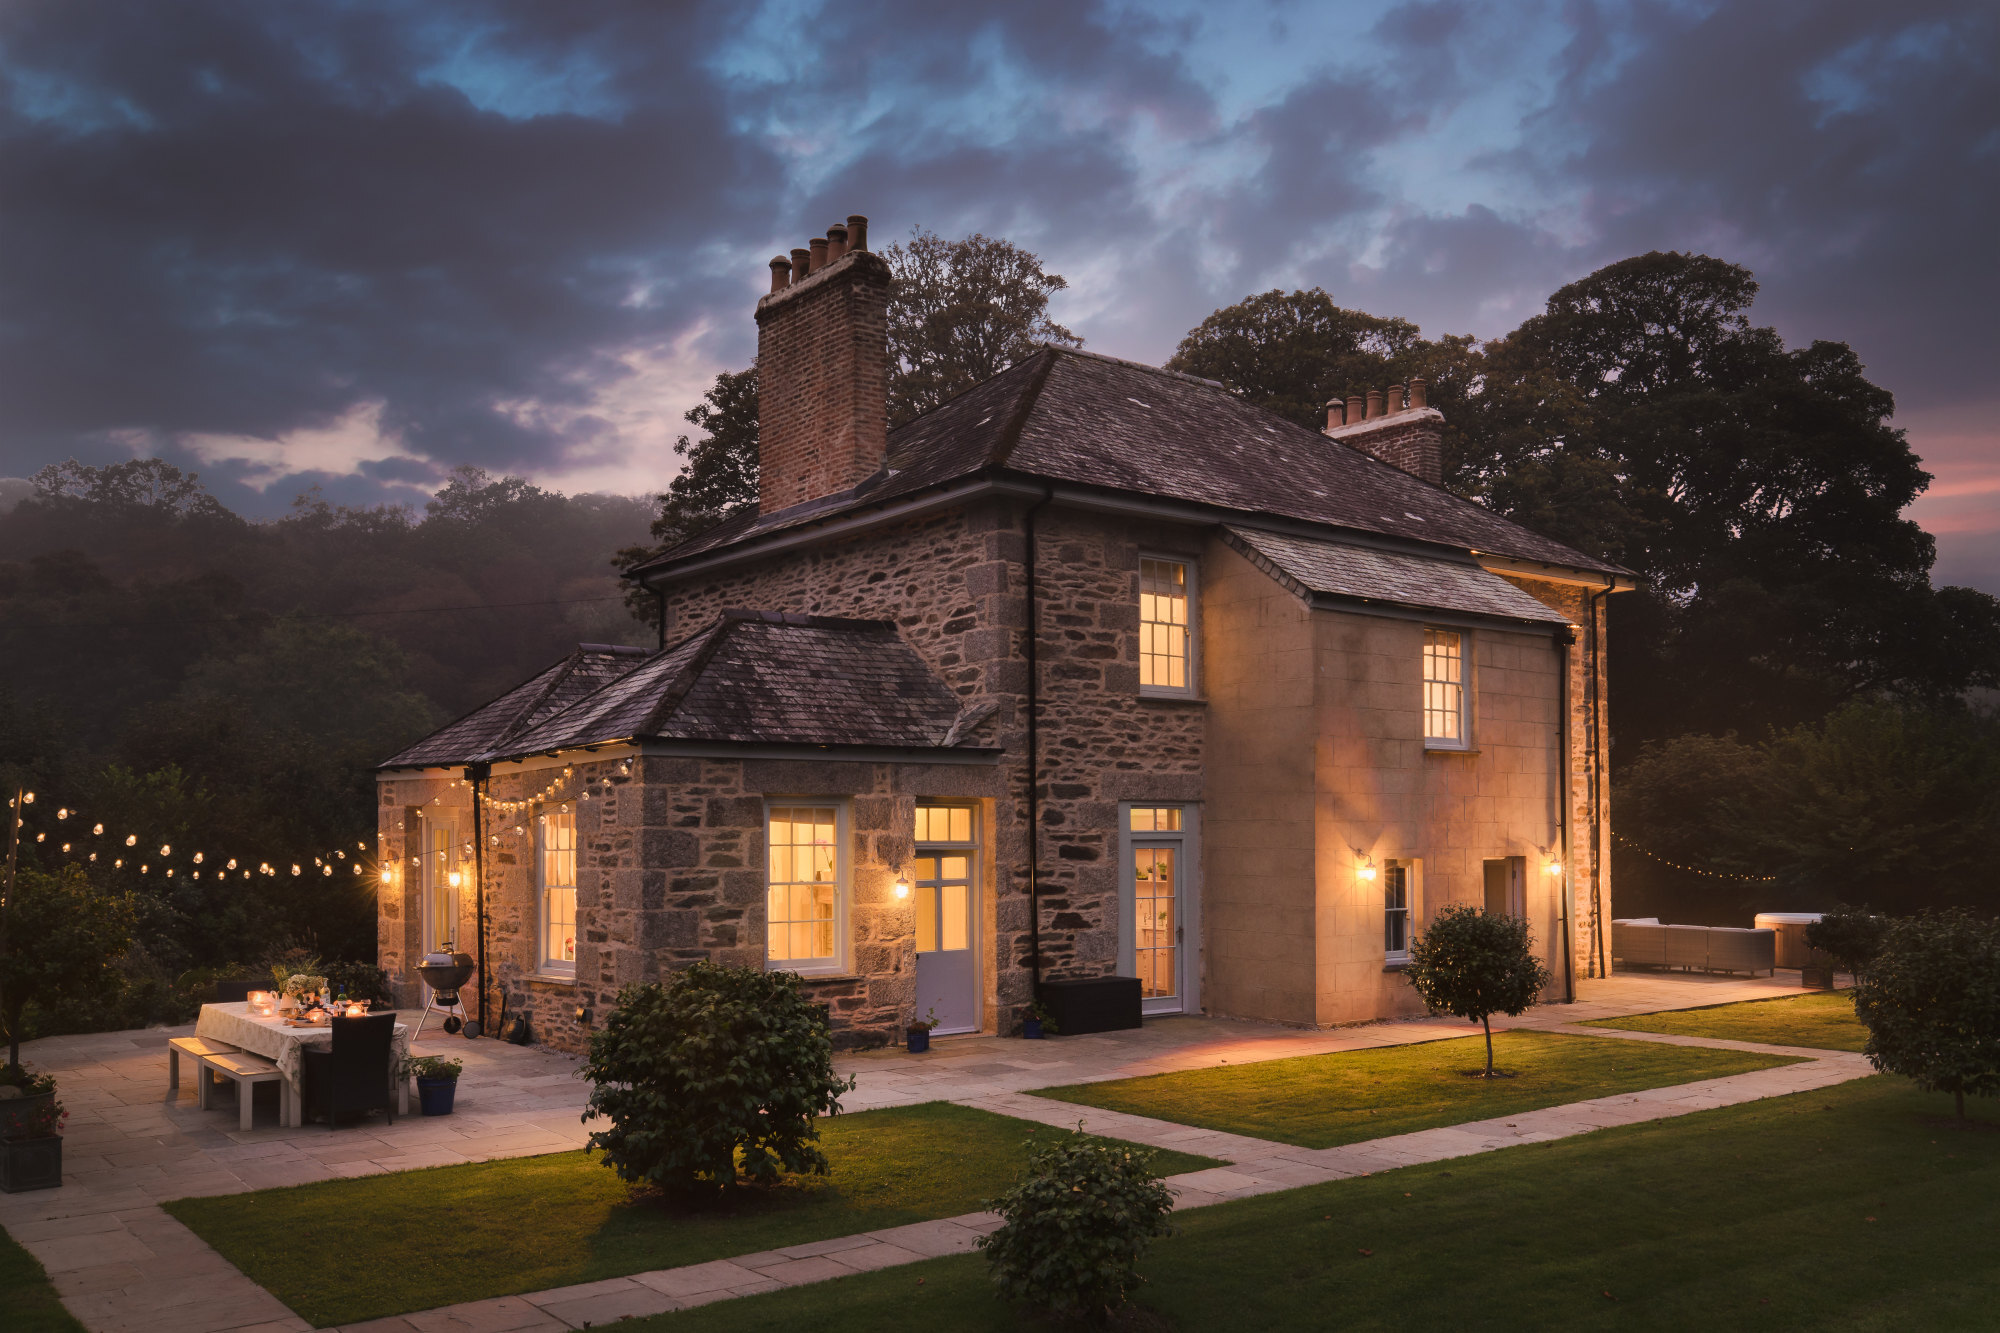 Detached homes are seeing strong demand as people look for extra rooms, gardens and distance from immediate neighbours. Photo: Savills Cornwall